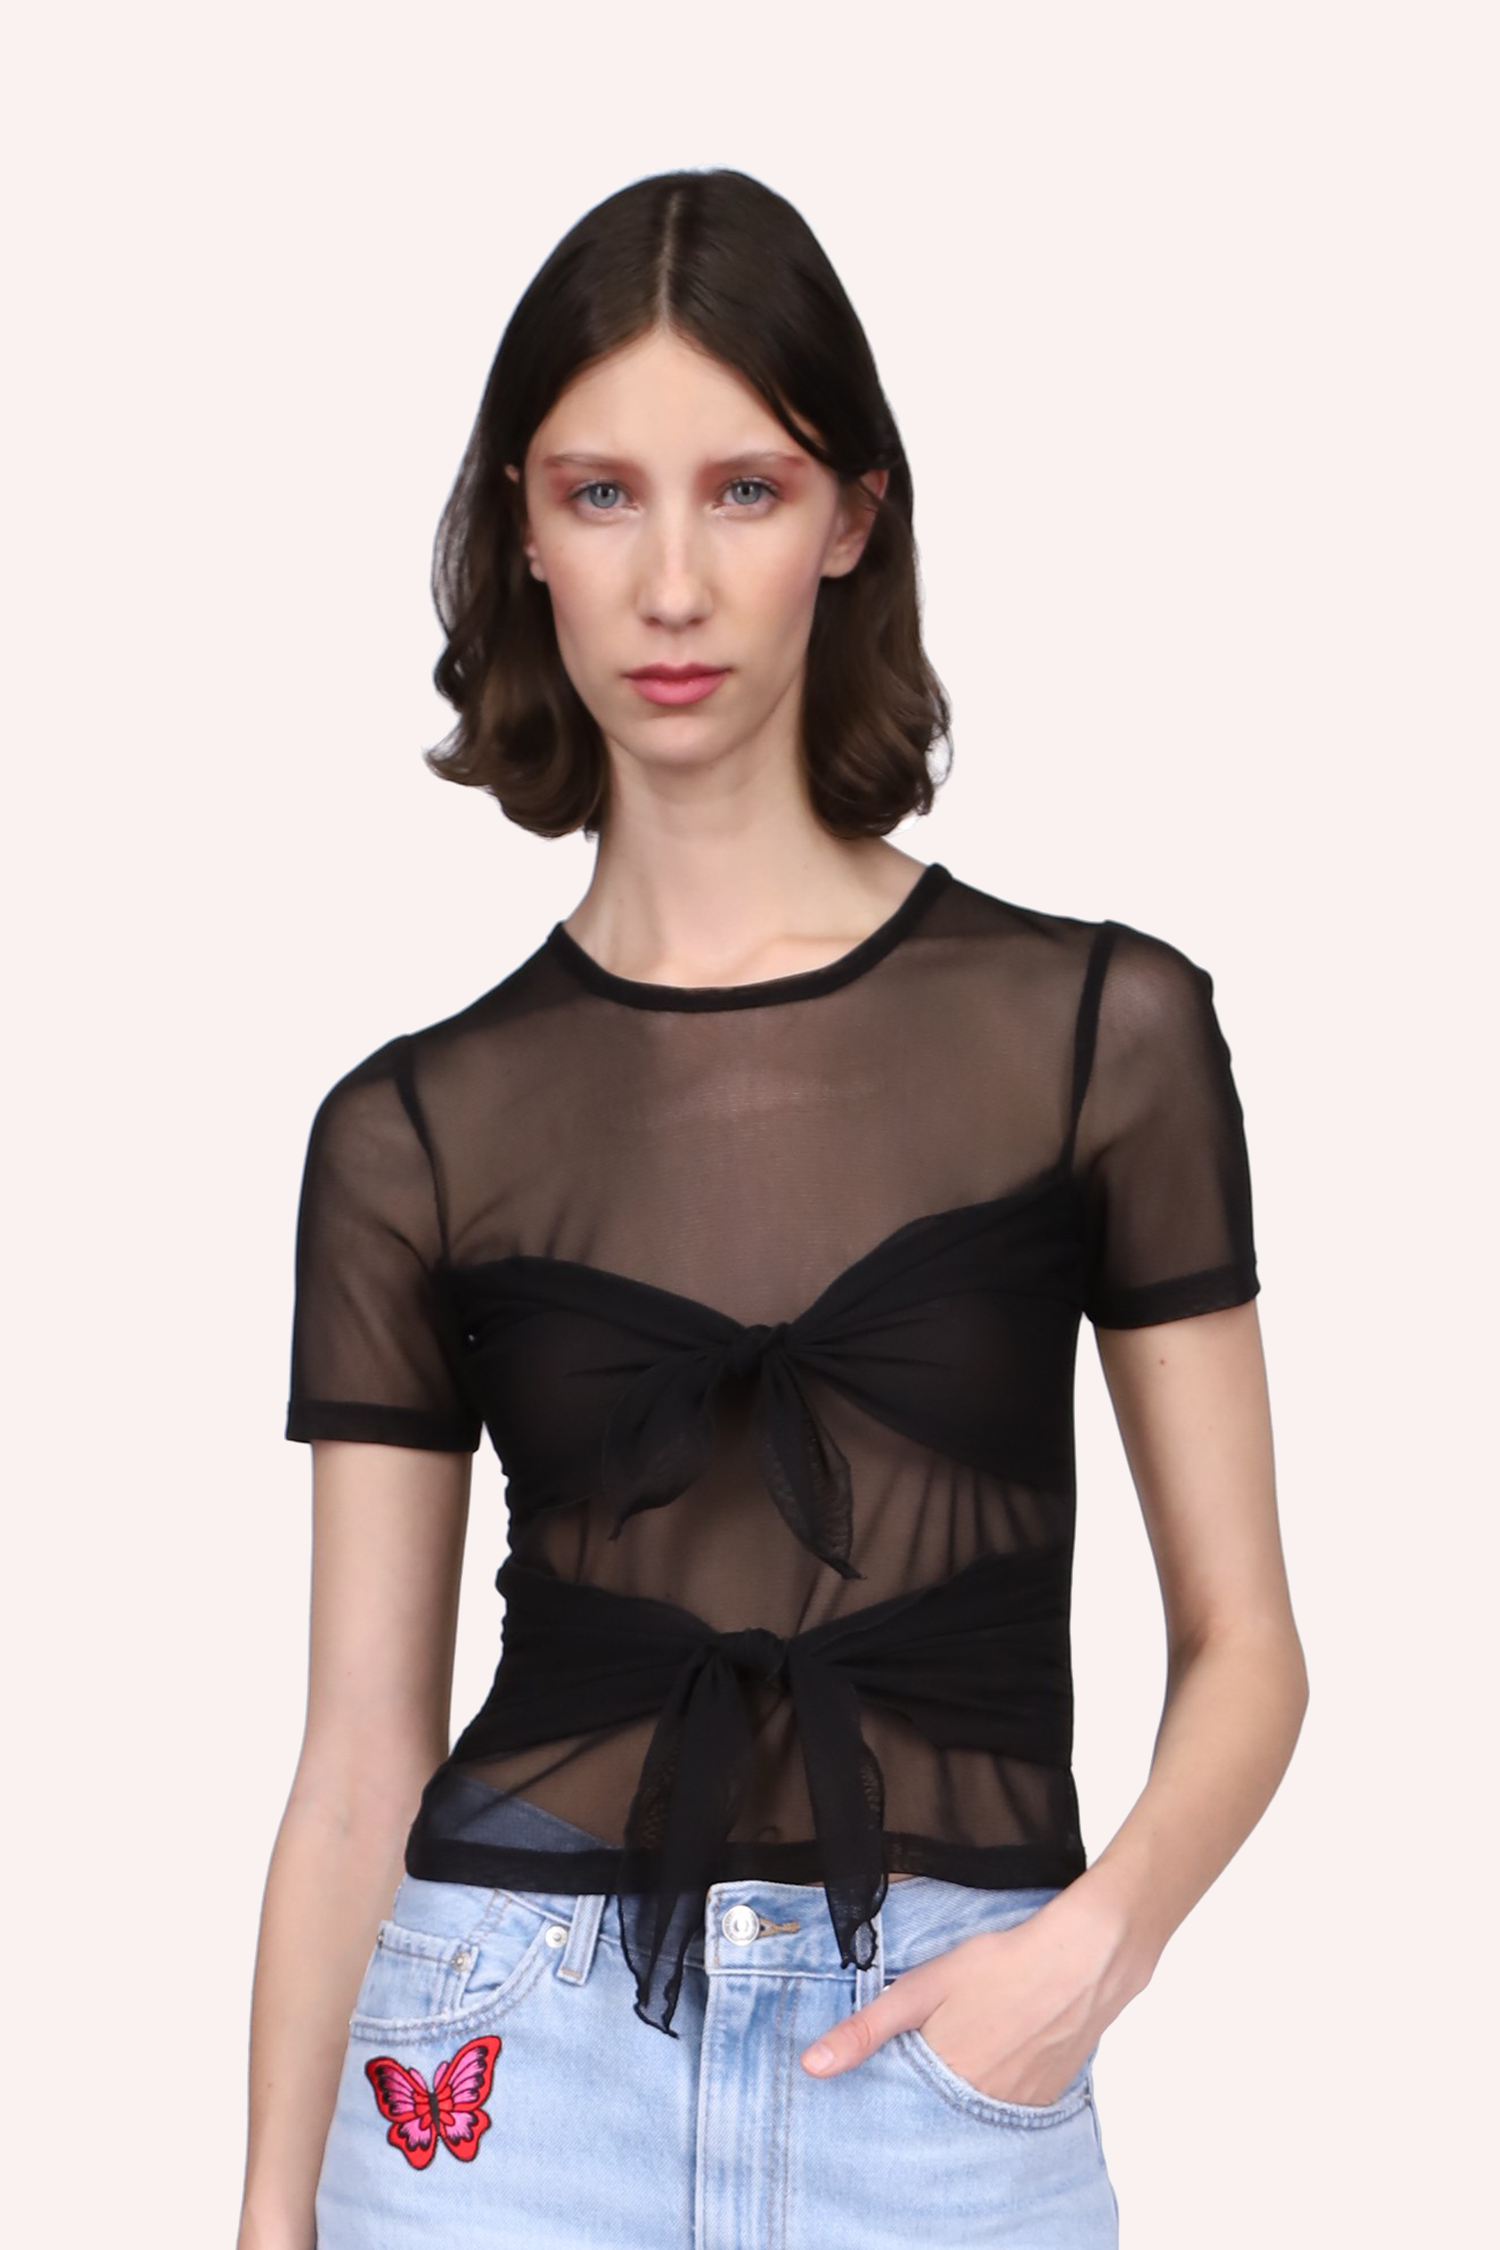 Top Black, see-thru, short sleeves, 2- front ribbon bows opaque black over breasts & stomach